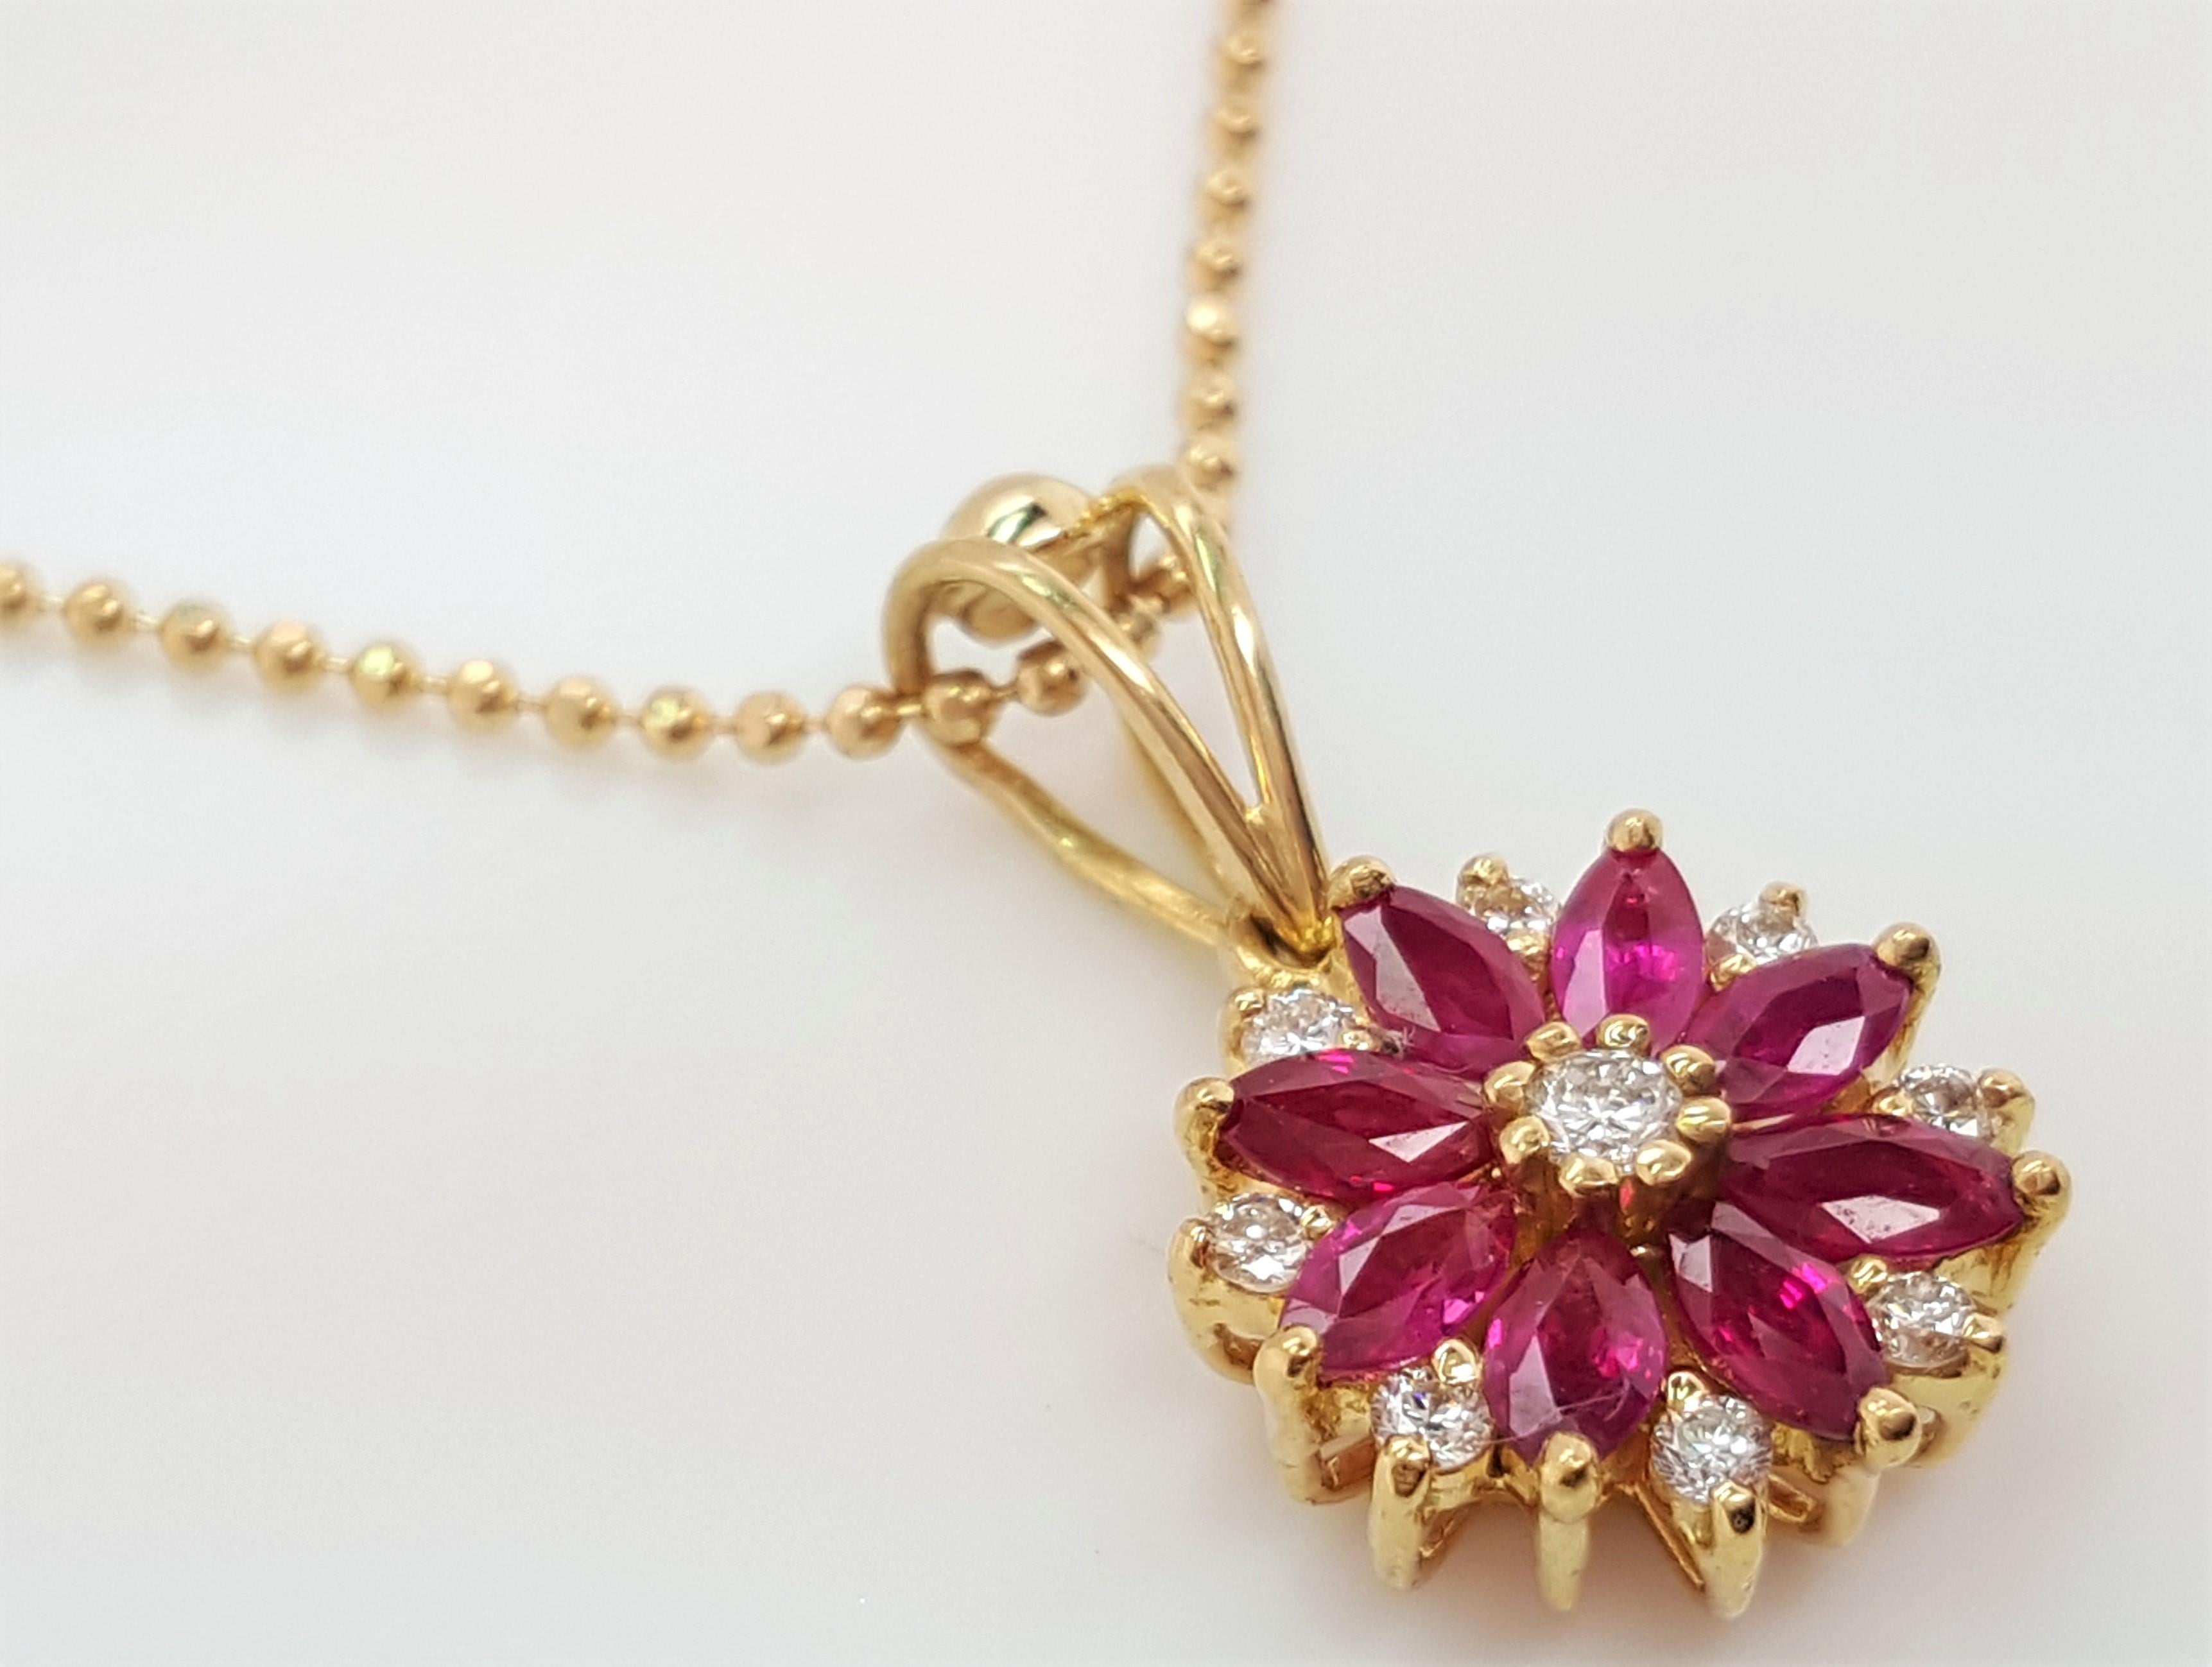 Marquise Cut 18 Karat Yellow Gold Flower Motif Diamond and Ruby Pendant with Chain For Sale